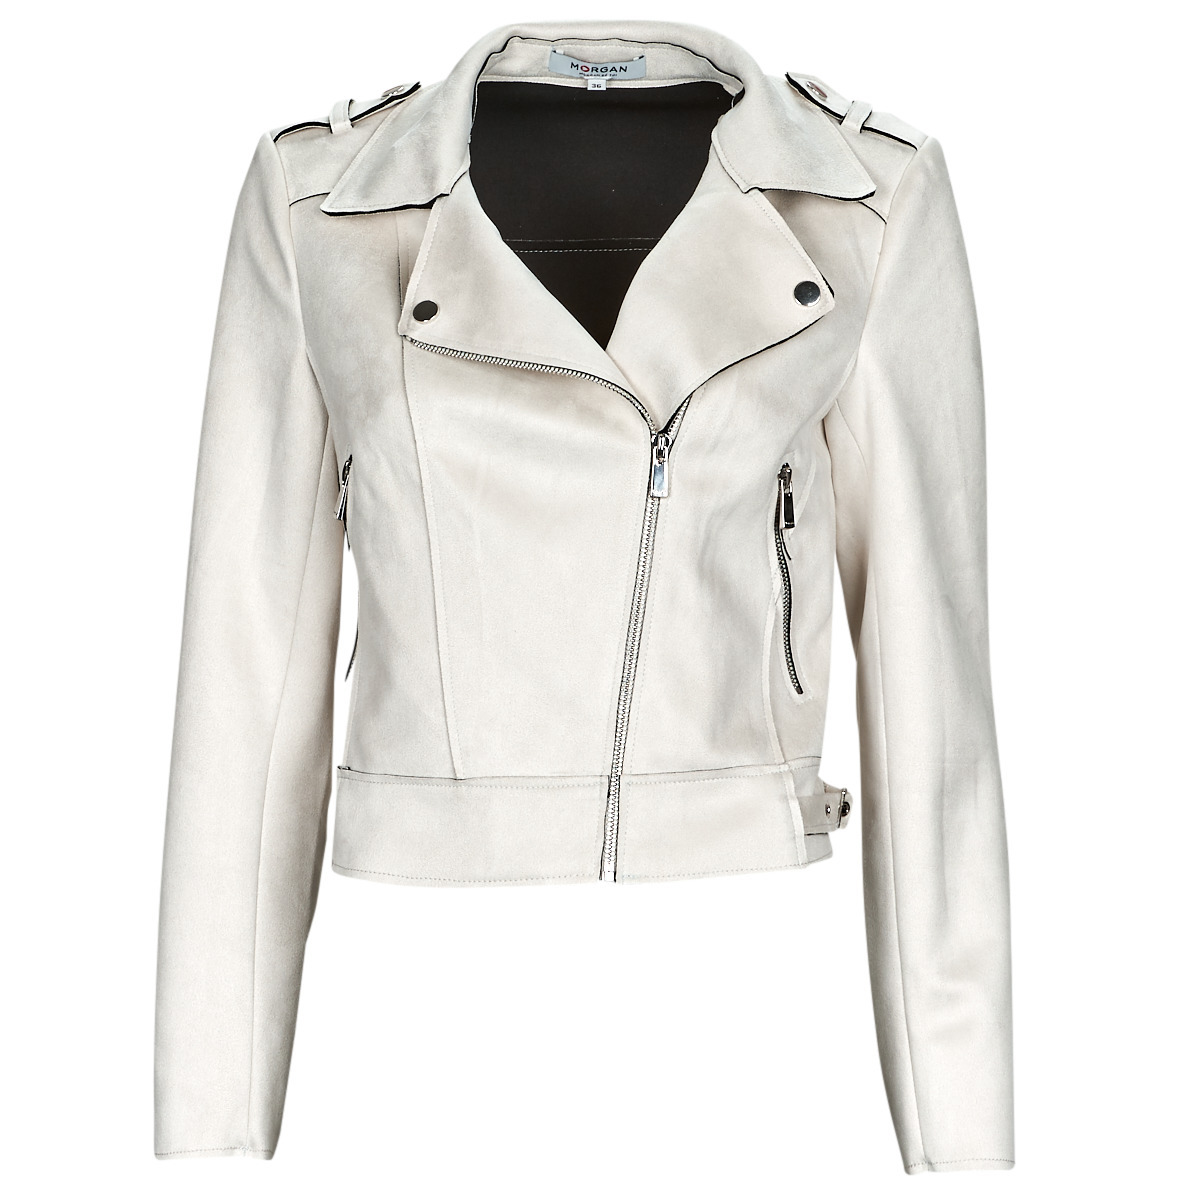 Morgan - Woman Leather Jacket in Beige from Spartoo GOOFASH